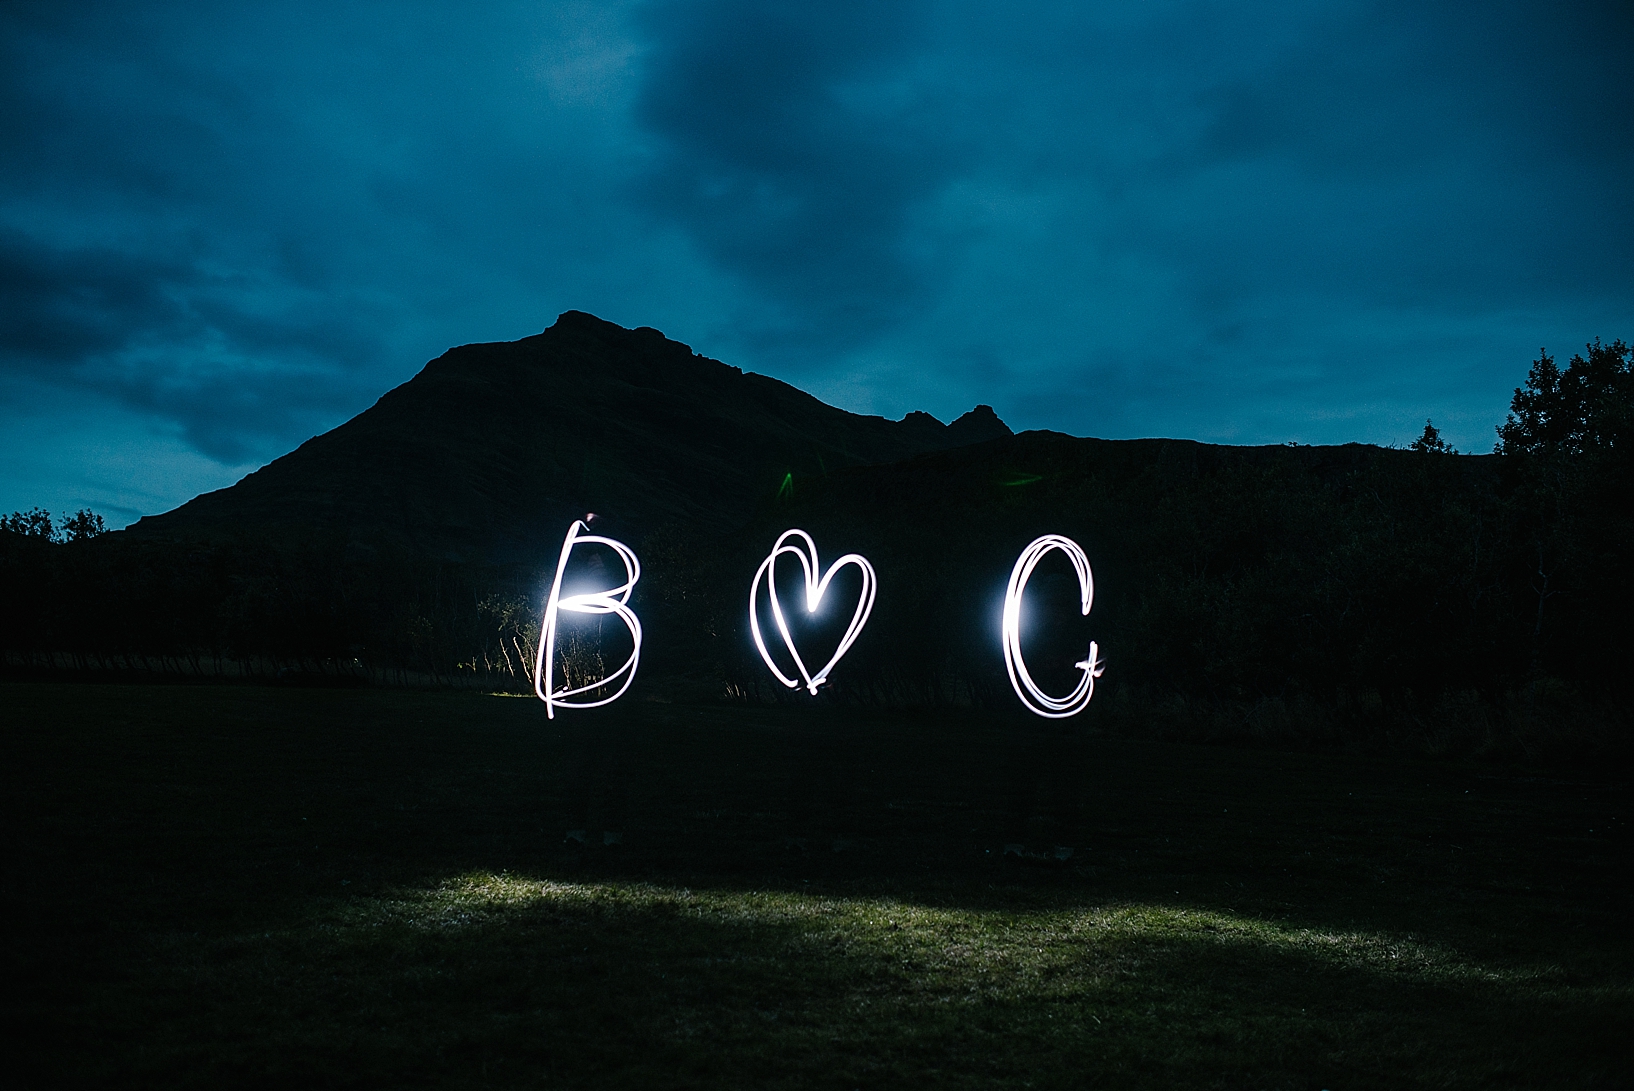 light painting in Iceland